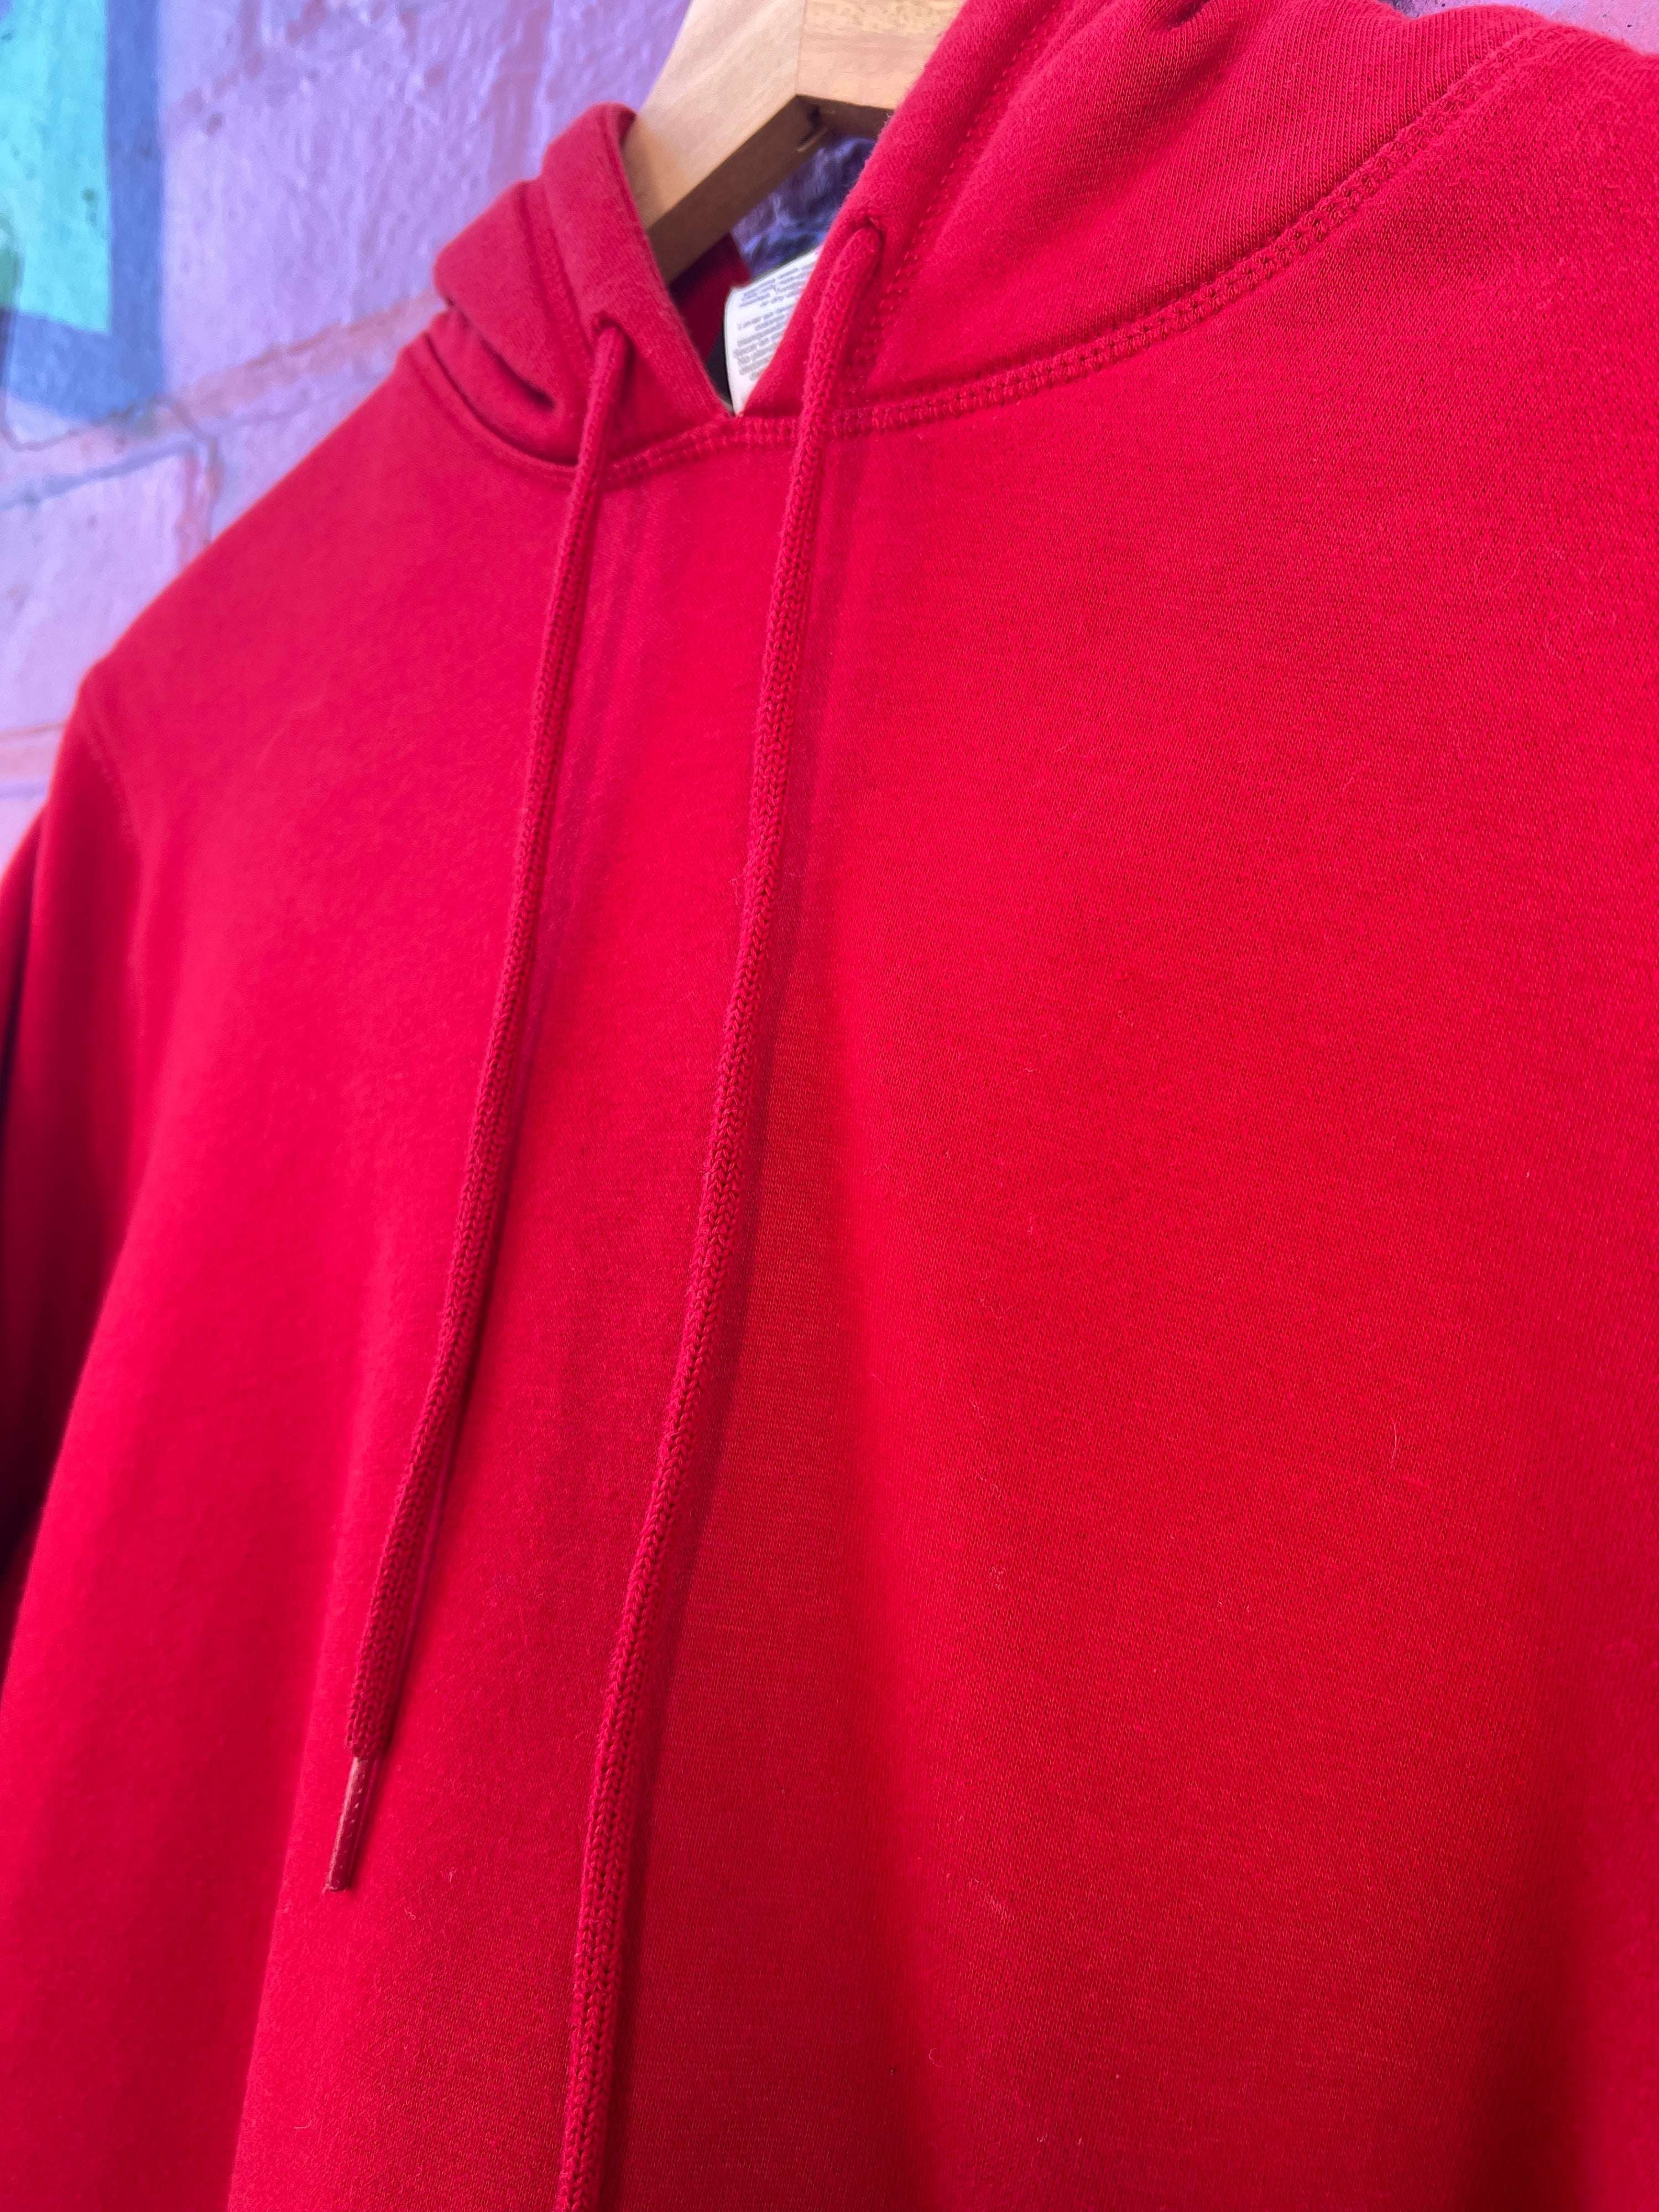 L  -Russell Athletic Red Basic Hoodie